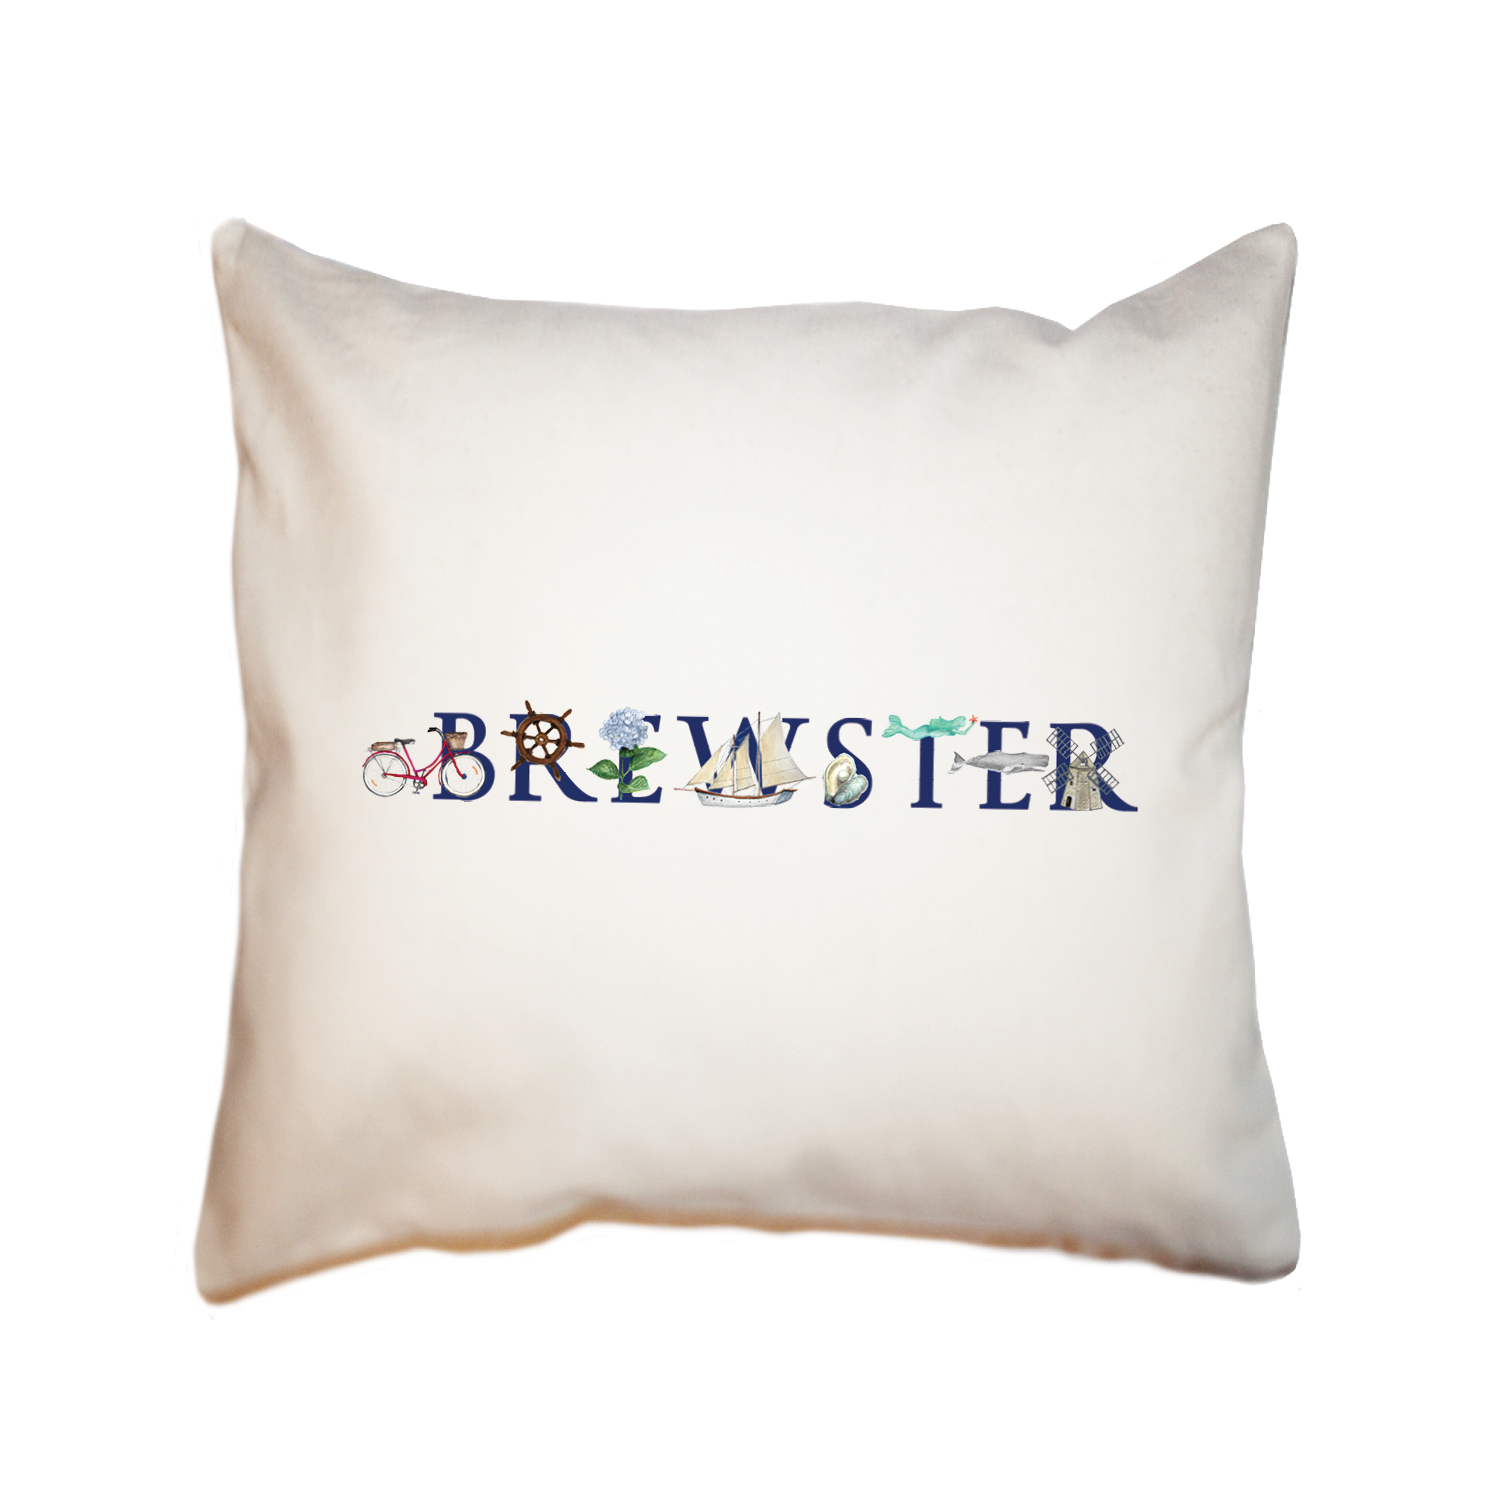 brewster square pillow